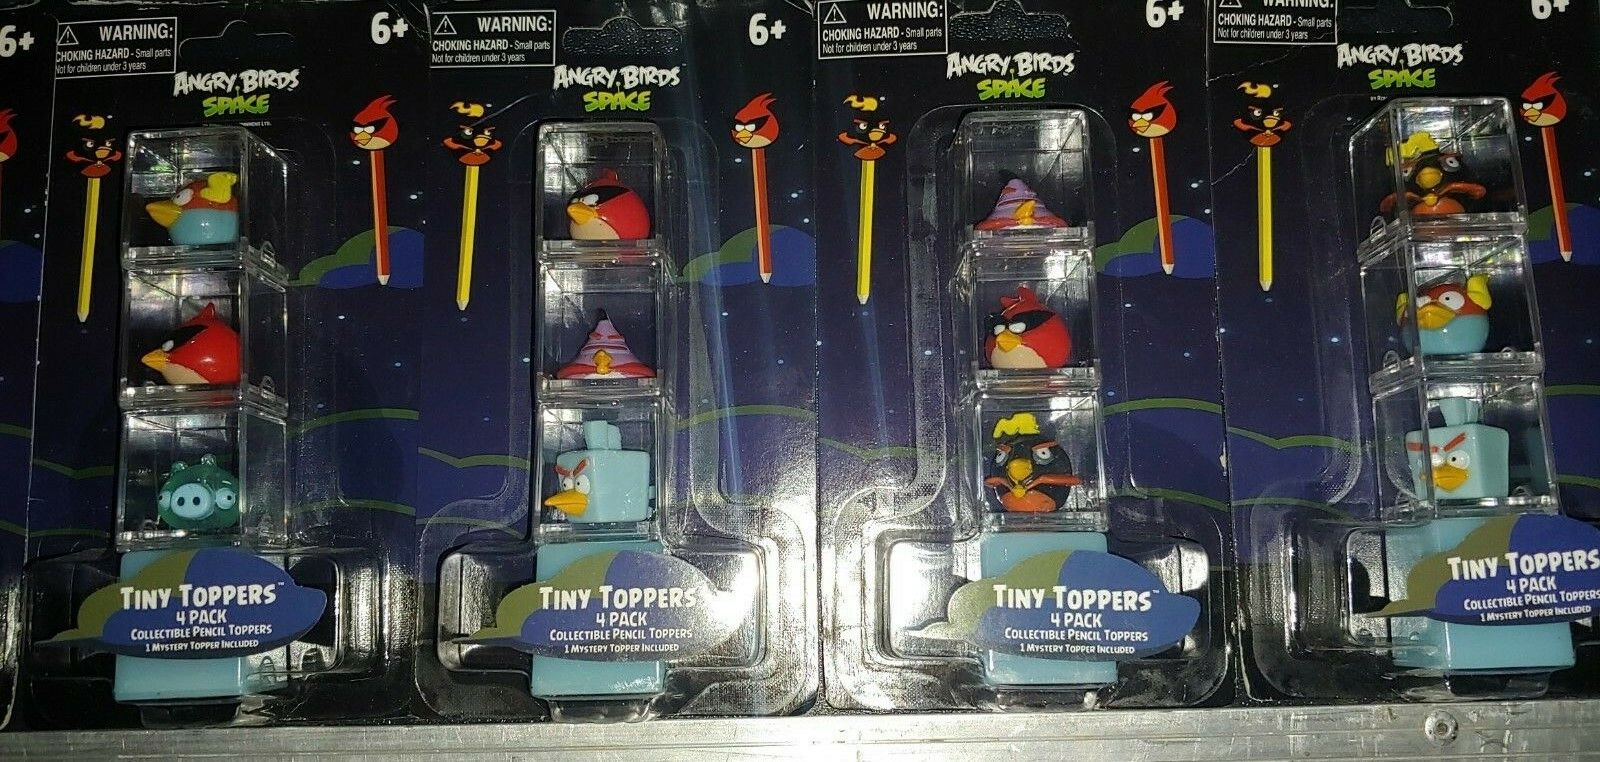 25 Lot Angry Birds Tiny Toppers 4pk....L@@KGreat Deal